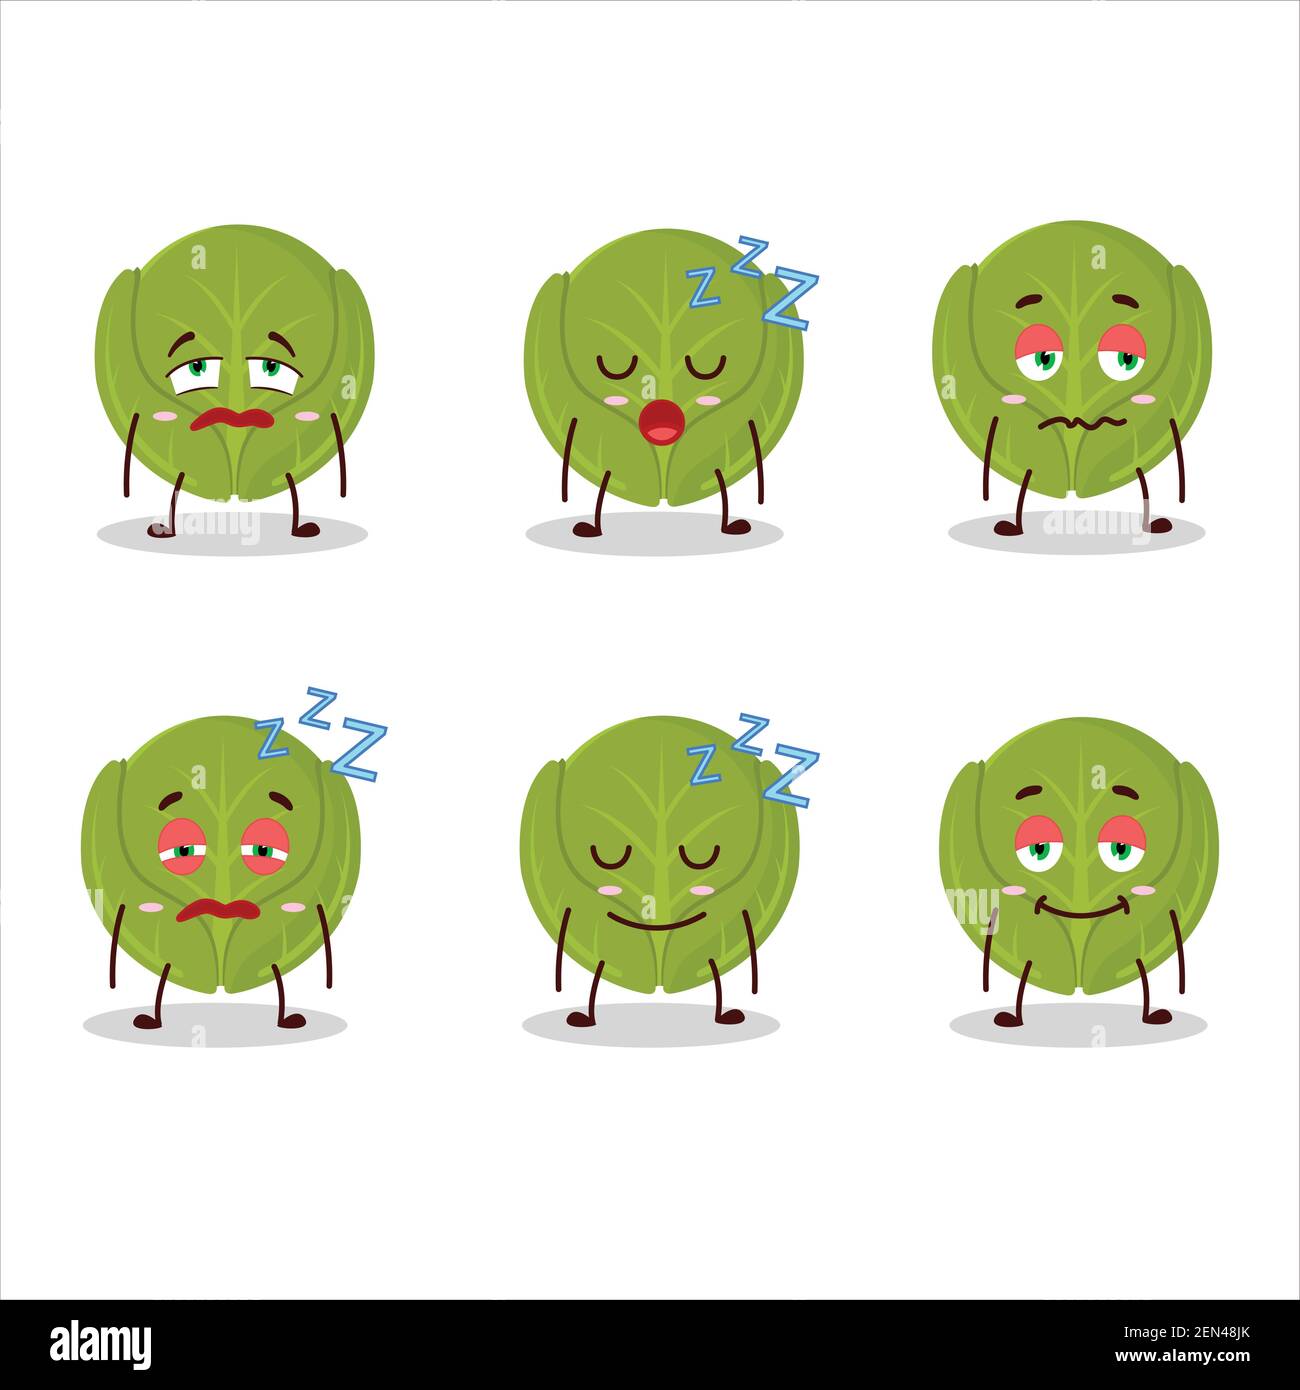 Cartoon character of brussels sprouts with sleepy expression. Vector illustration Stock Vector